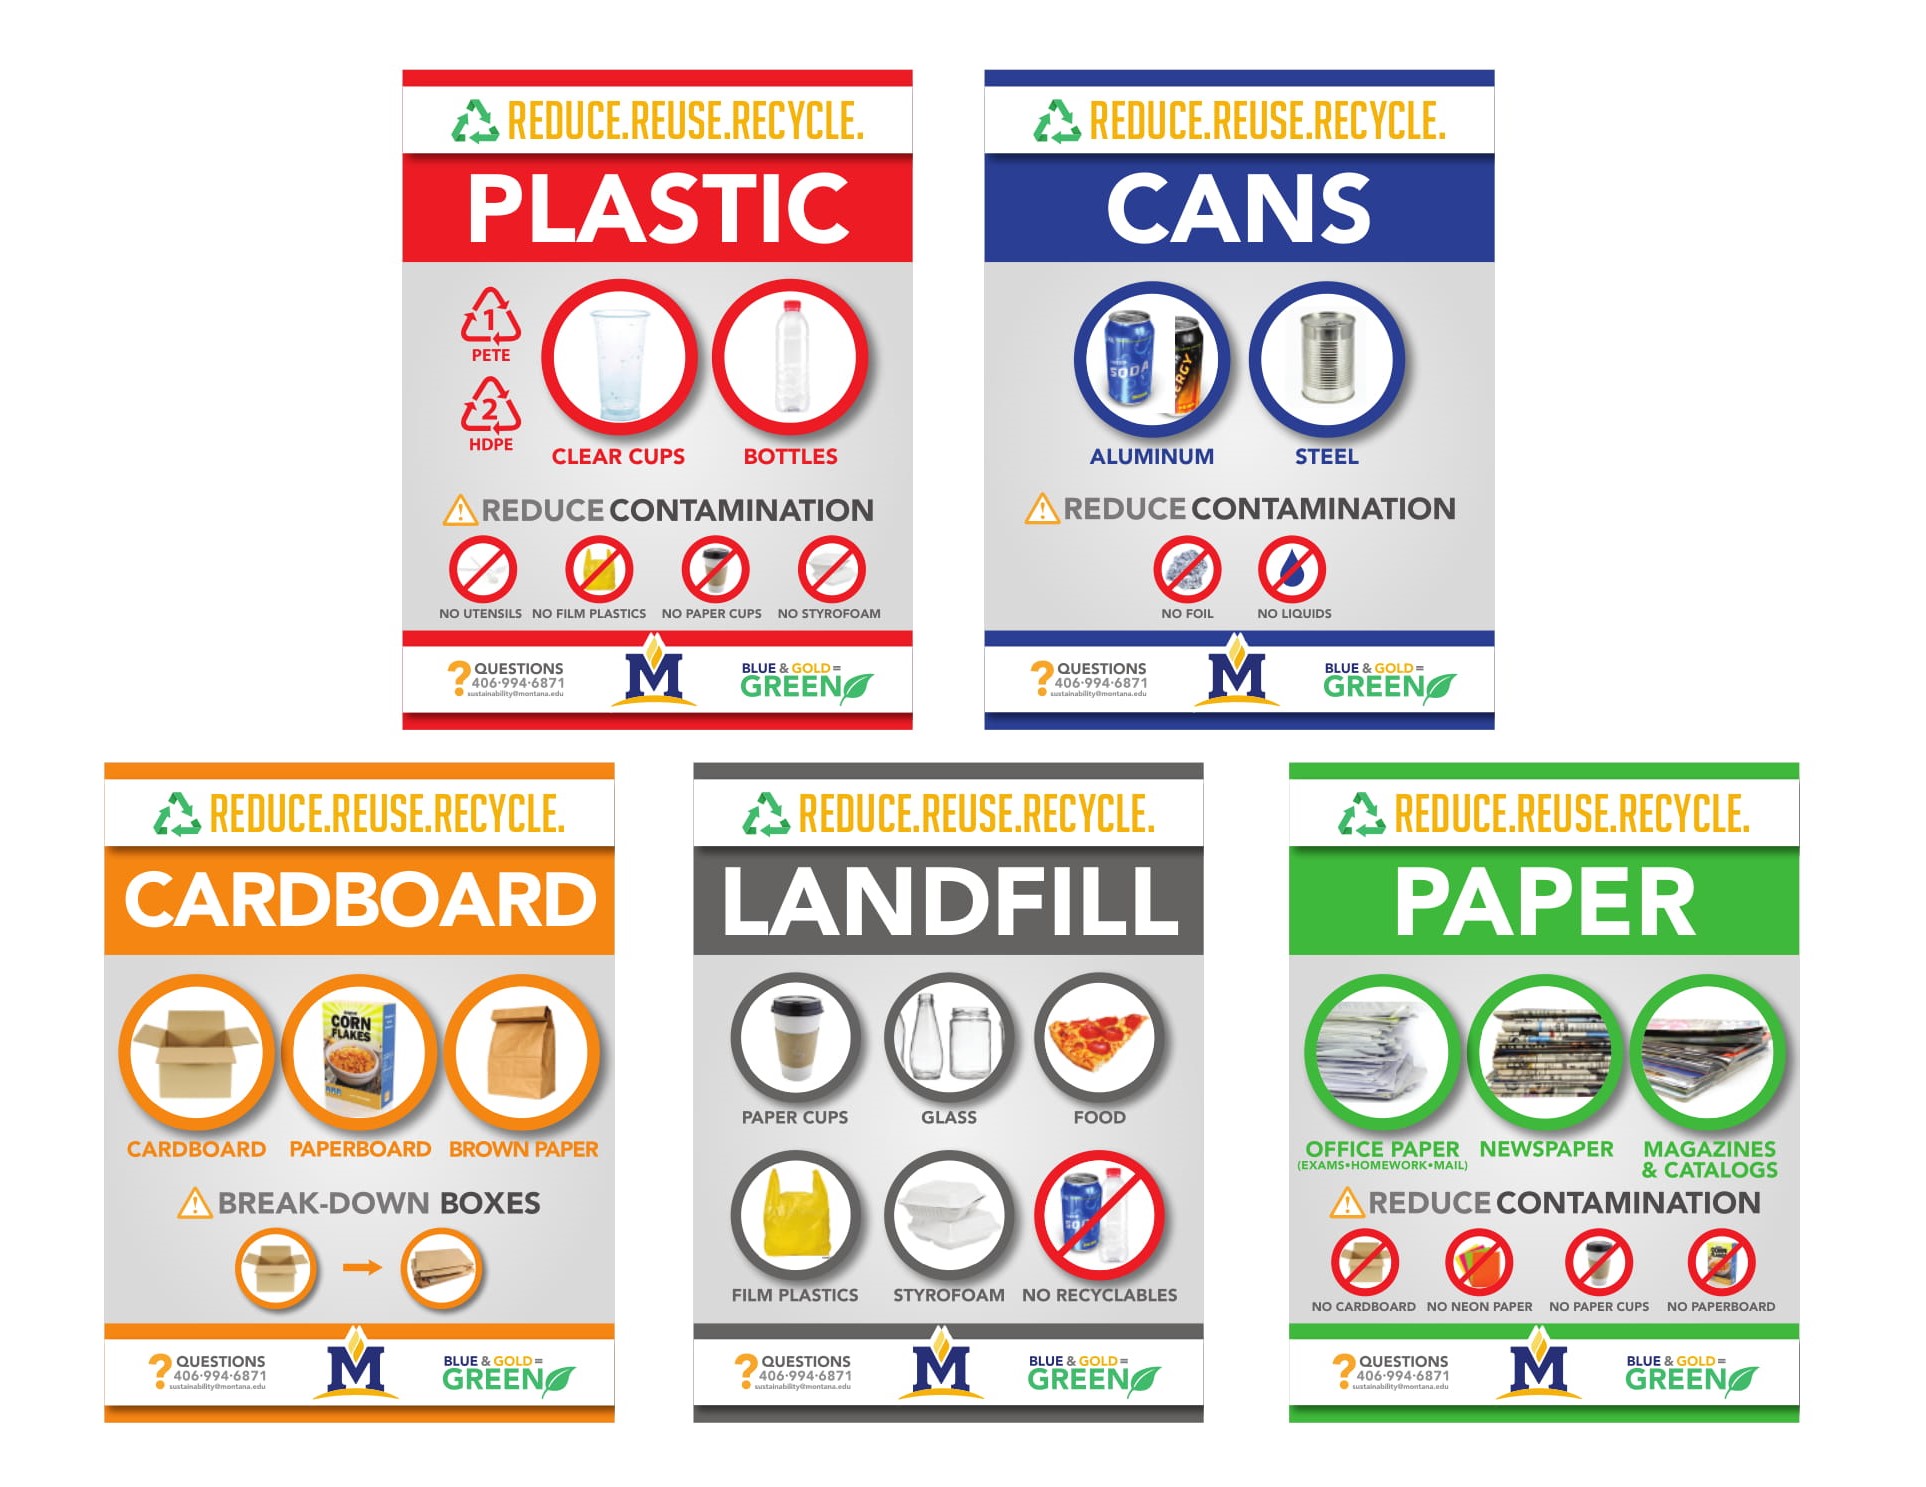 MSU Recyling Signage. Paper sign describing how you can recycle office paper, newspaper, and magazines/catalogs.